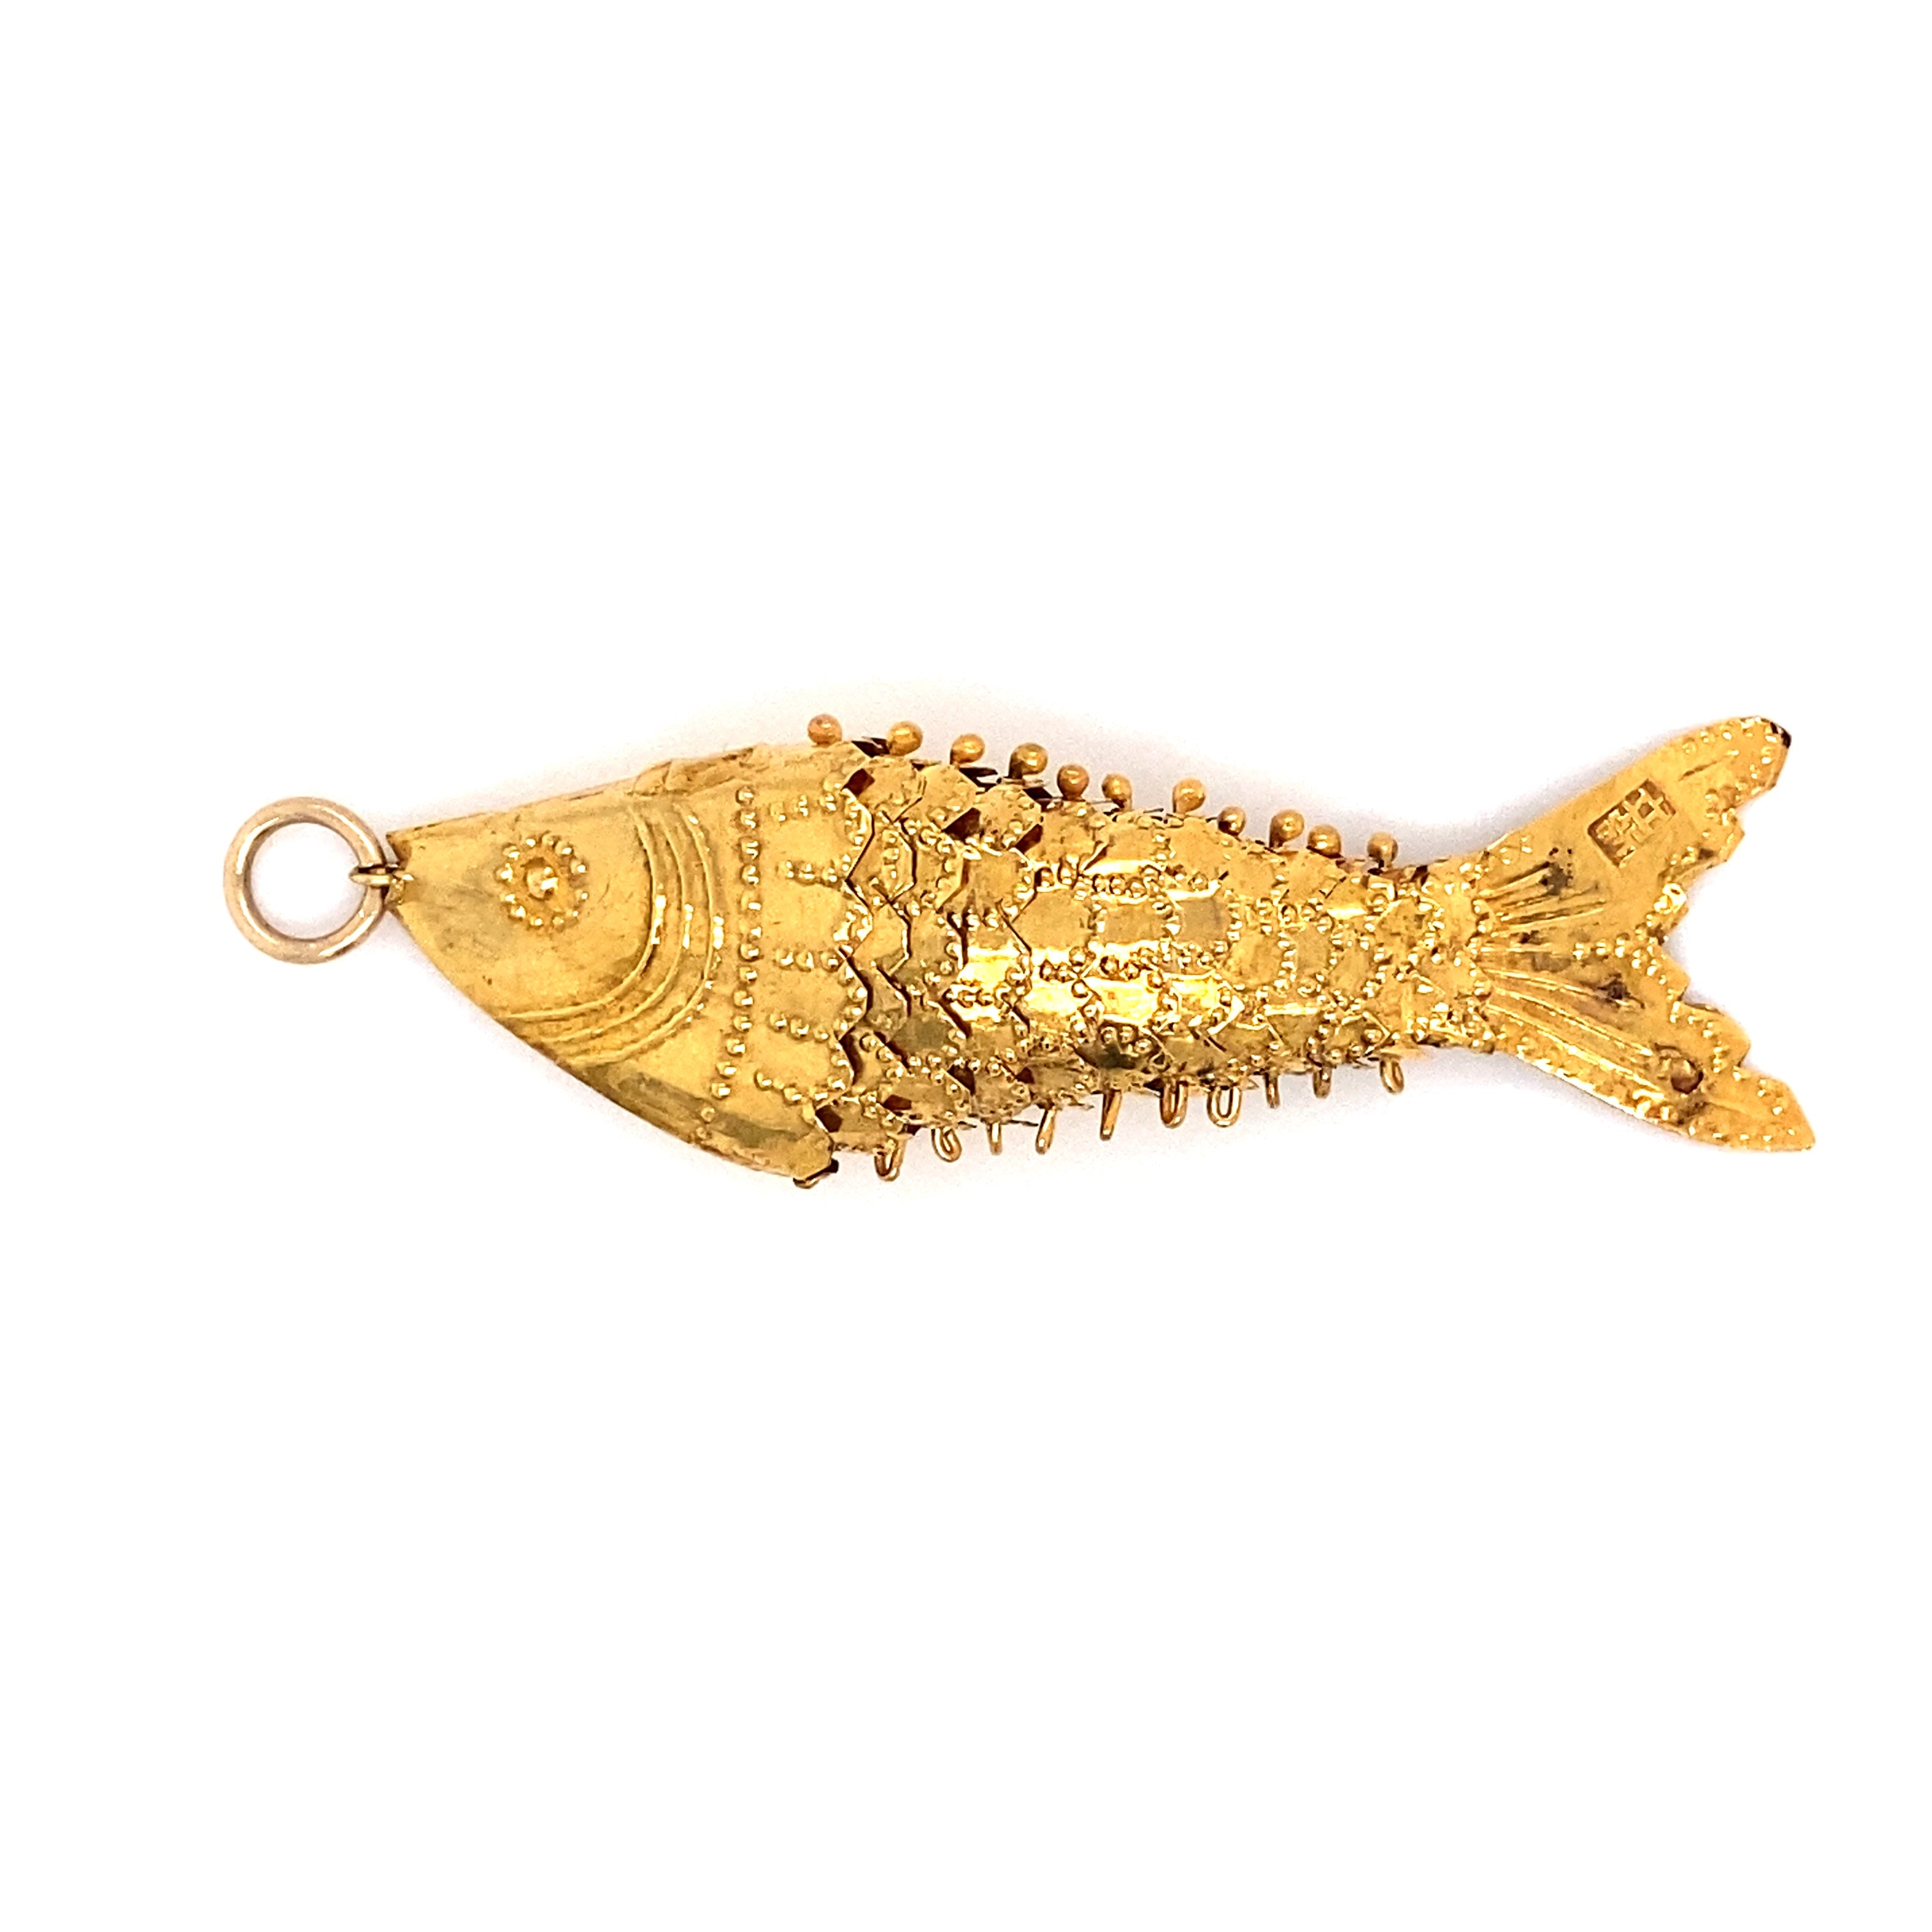 Circa 1980s Chinese Articulated Fish Pendant in 18K Gold – The